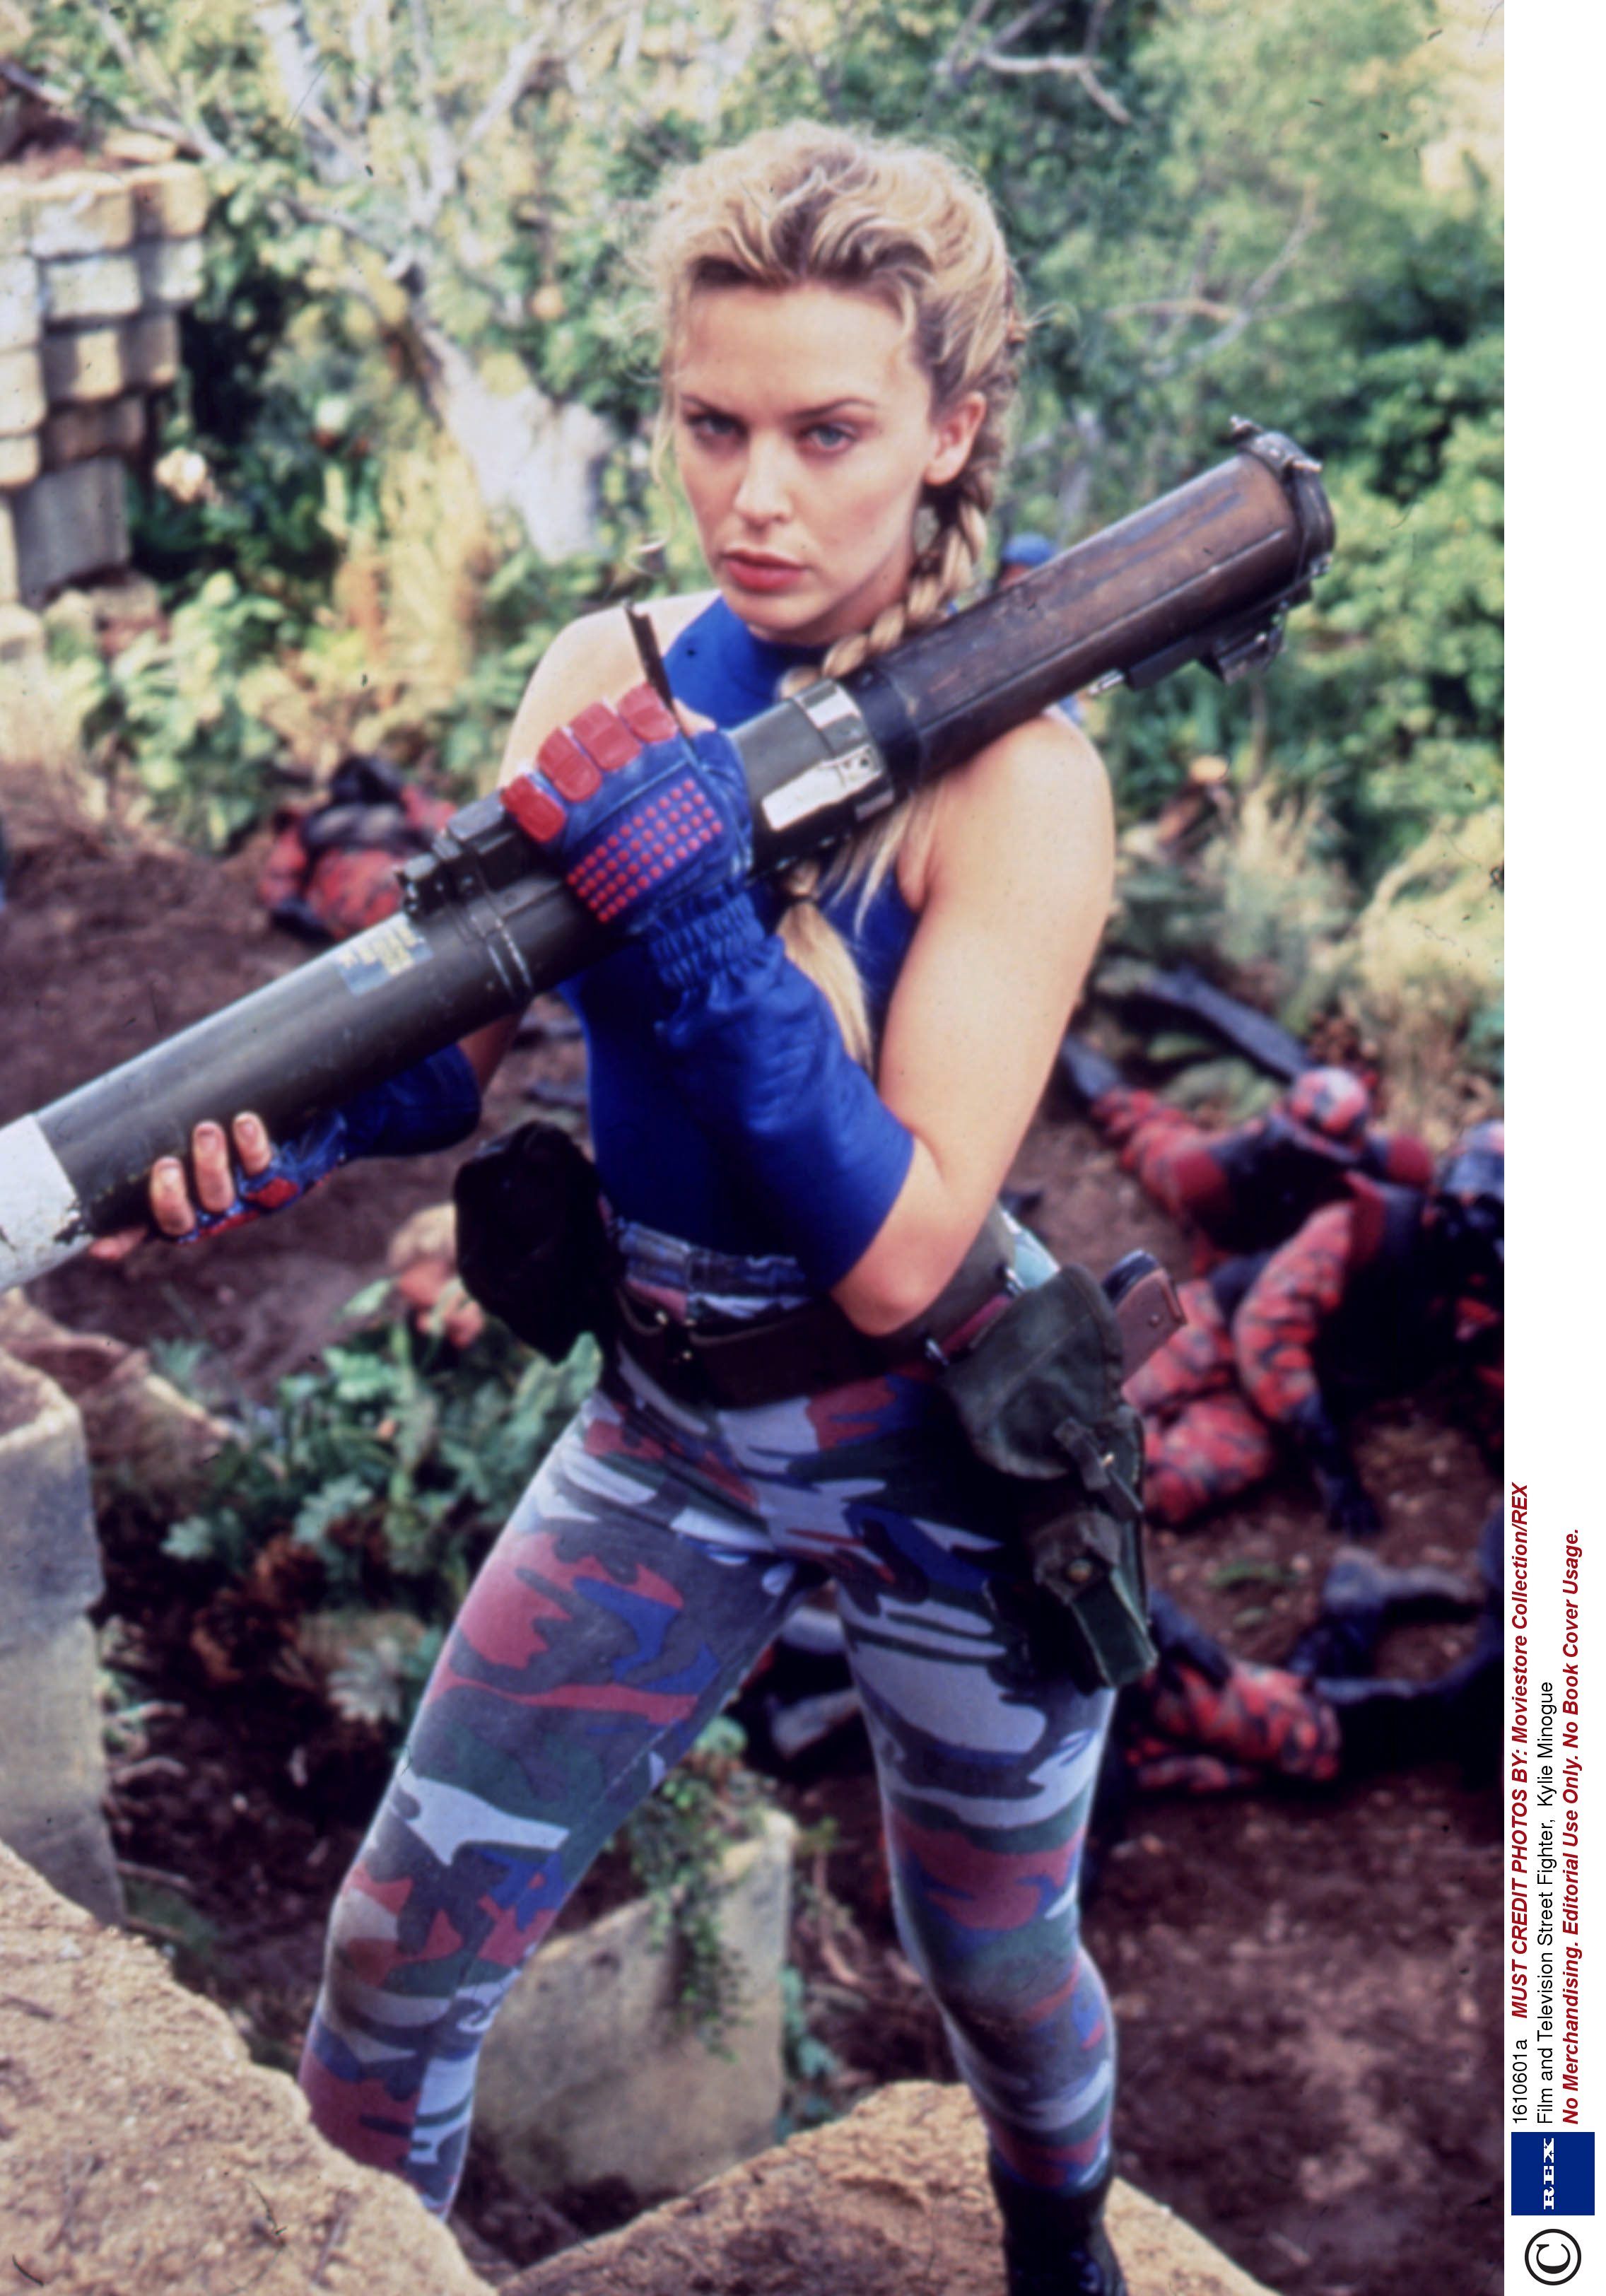 Cammy Fan Casting for Street Fighter-The movie